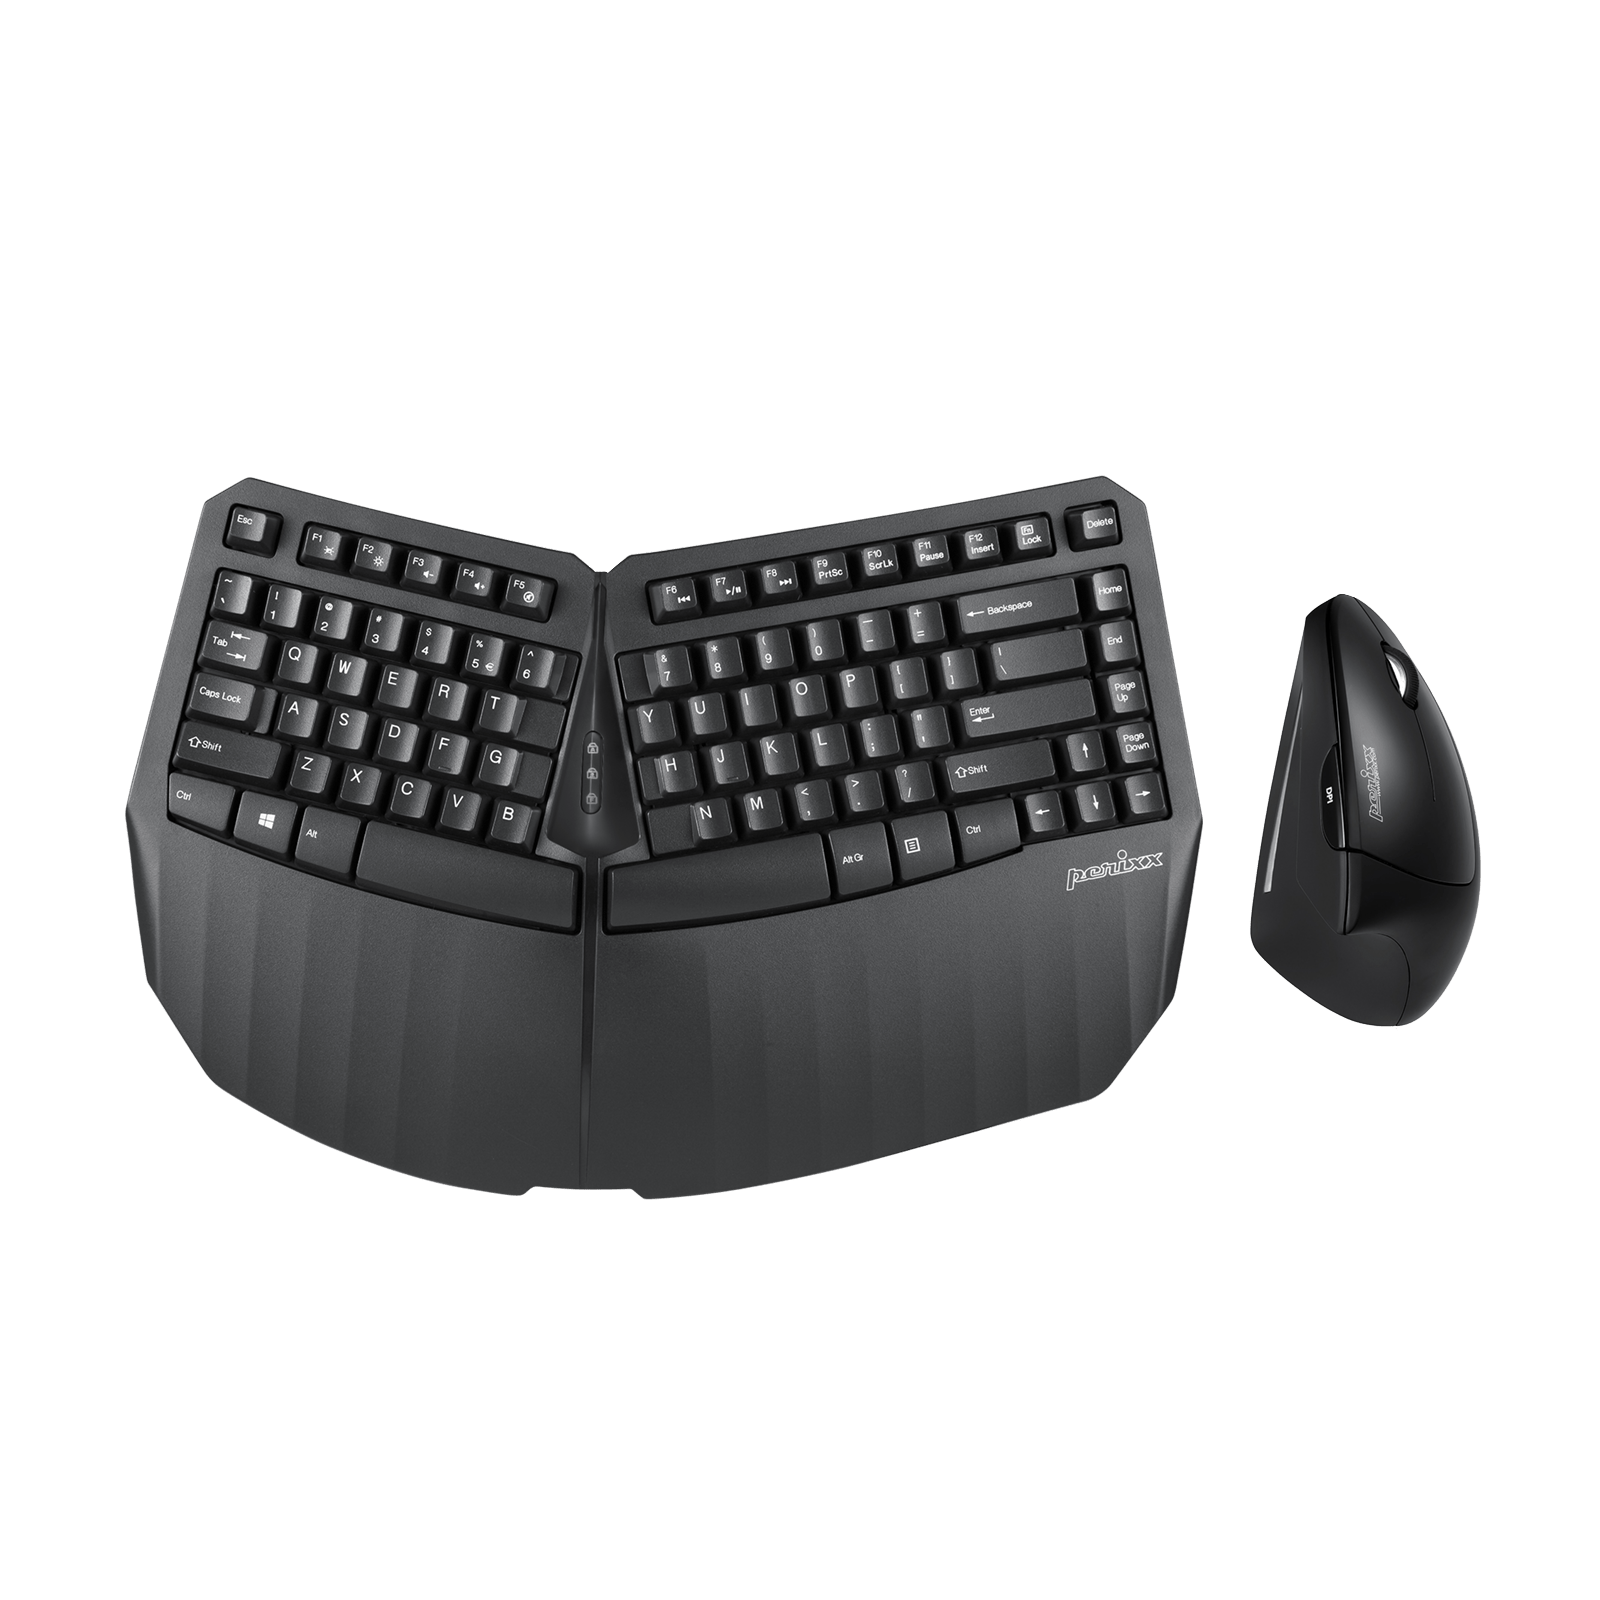 PERIDUO-813B Wireless Ergonomic Compact Keyboard & Vertical Mouse - Bundle with a 6-Button Ergonomic Vertical Mouse - Black - Perixx Europe